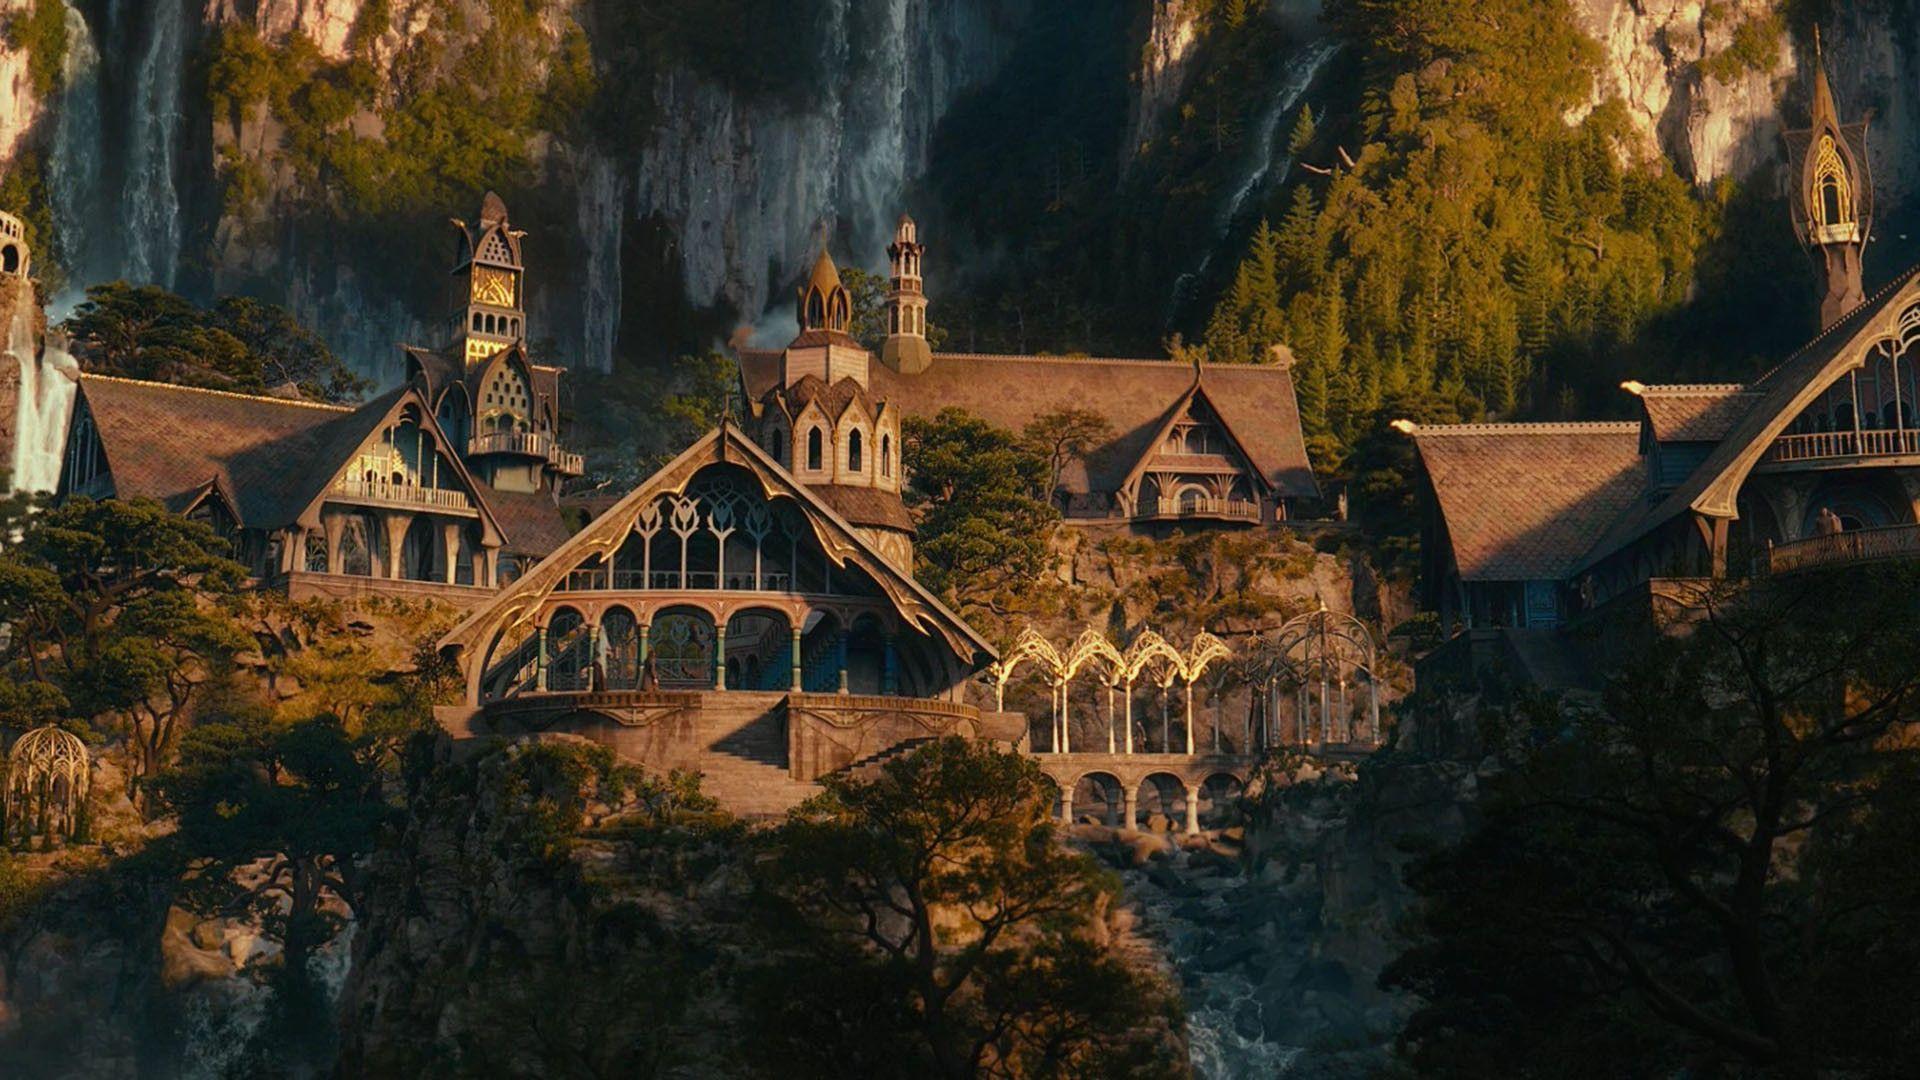 Rivendell HD Wallpaper. Rivendell and other Middle Earth